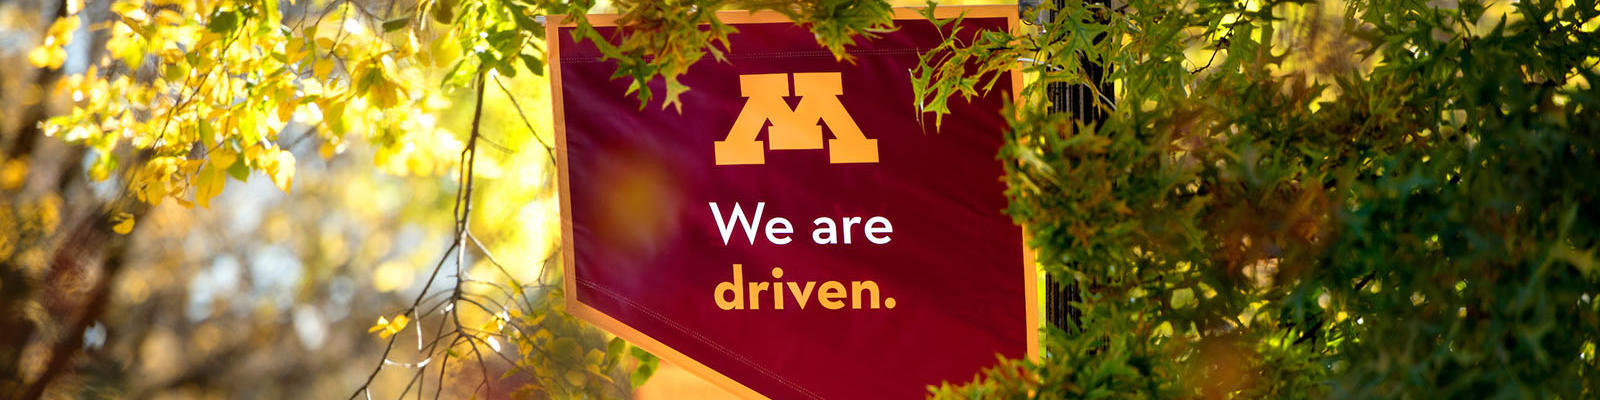 Maroon and gold banner that says We are driven